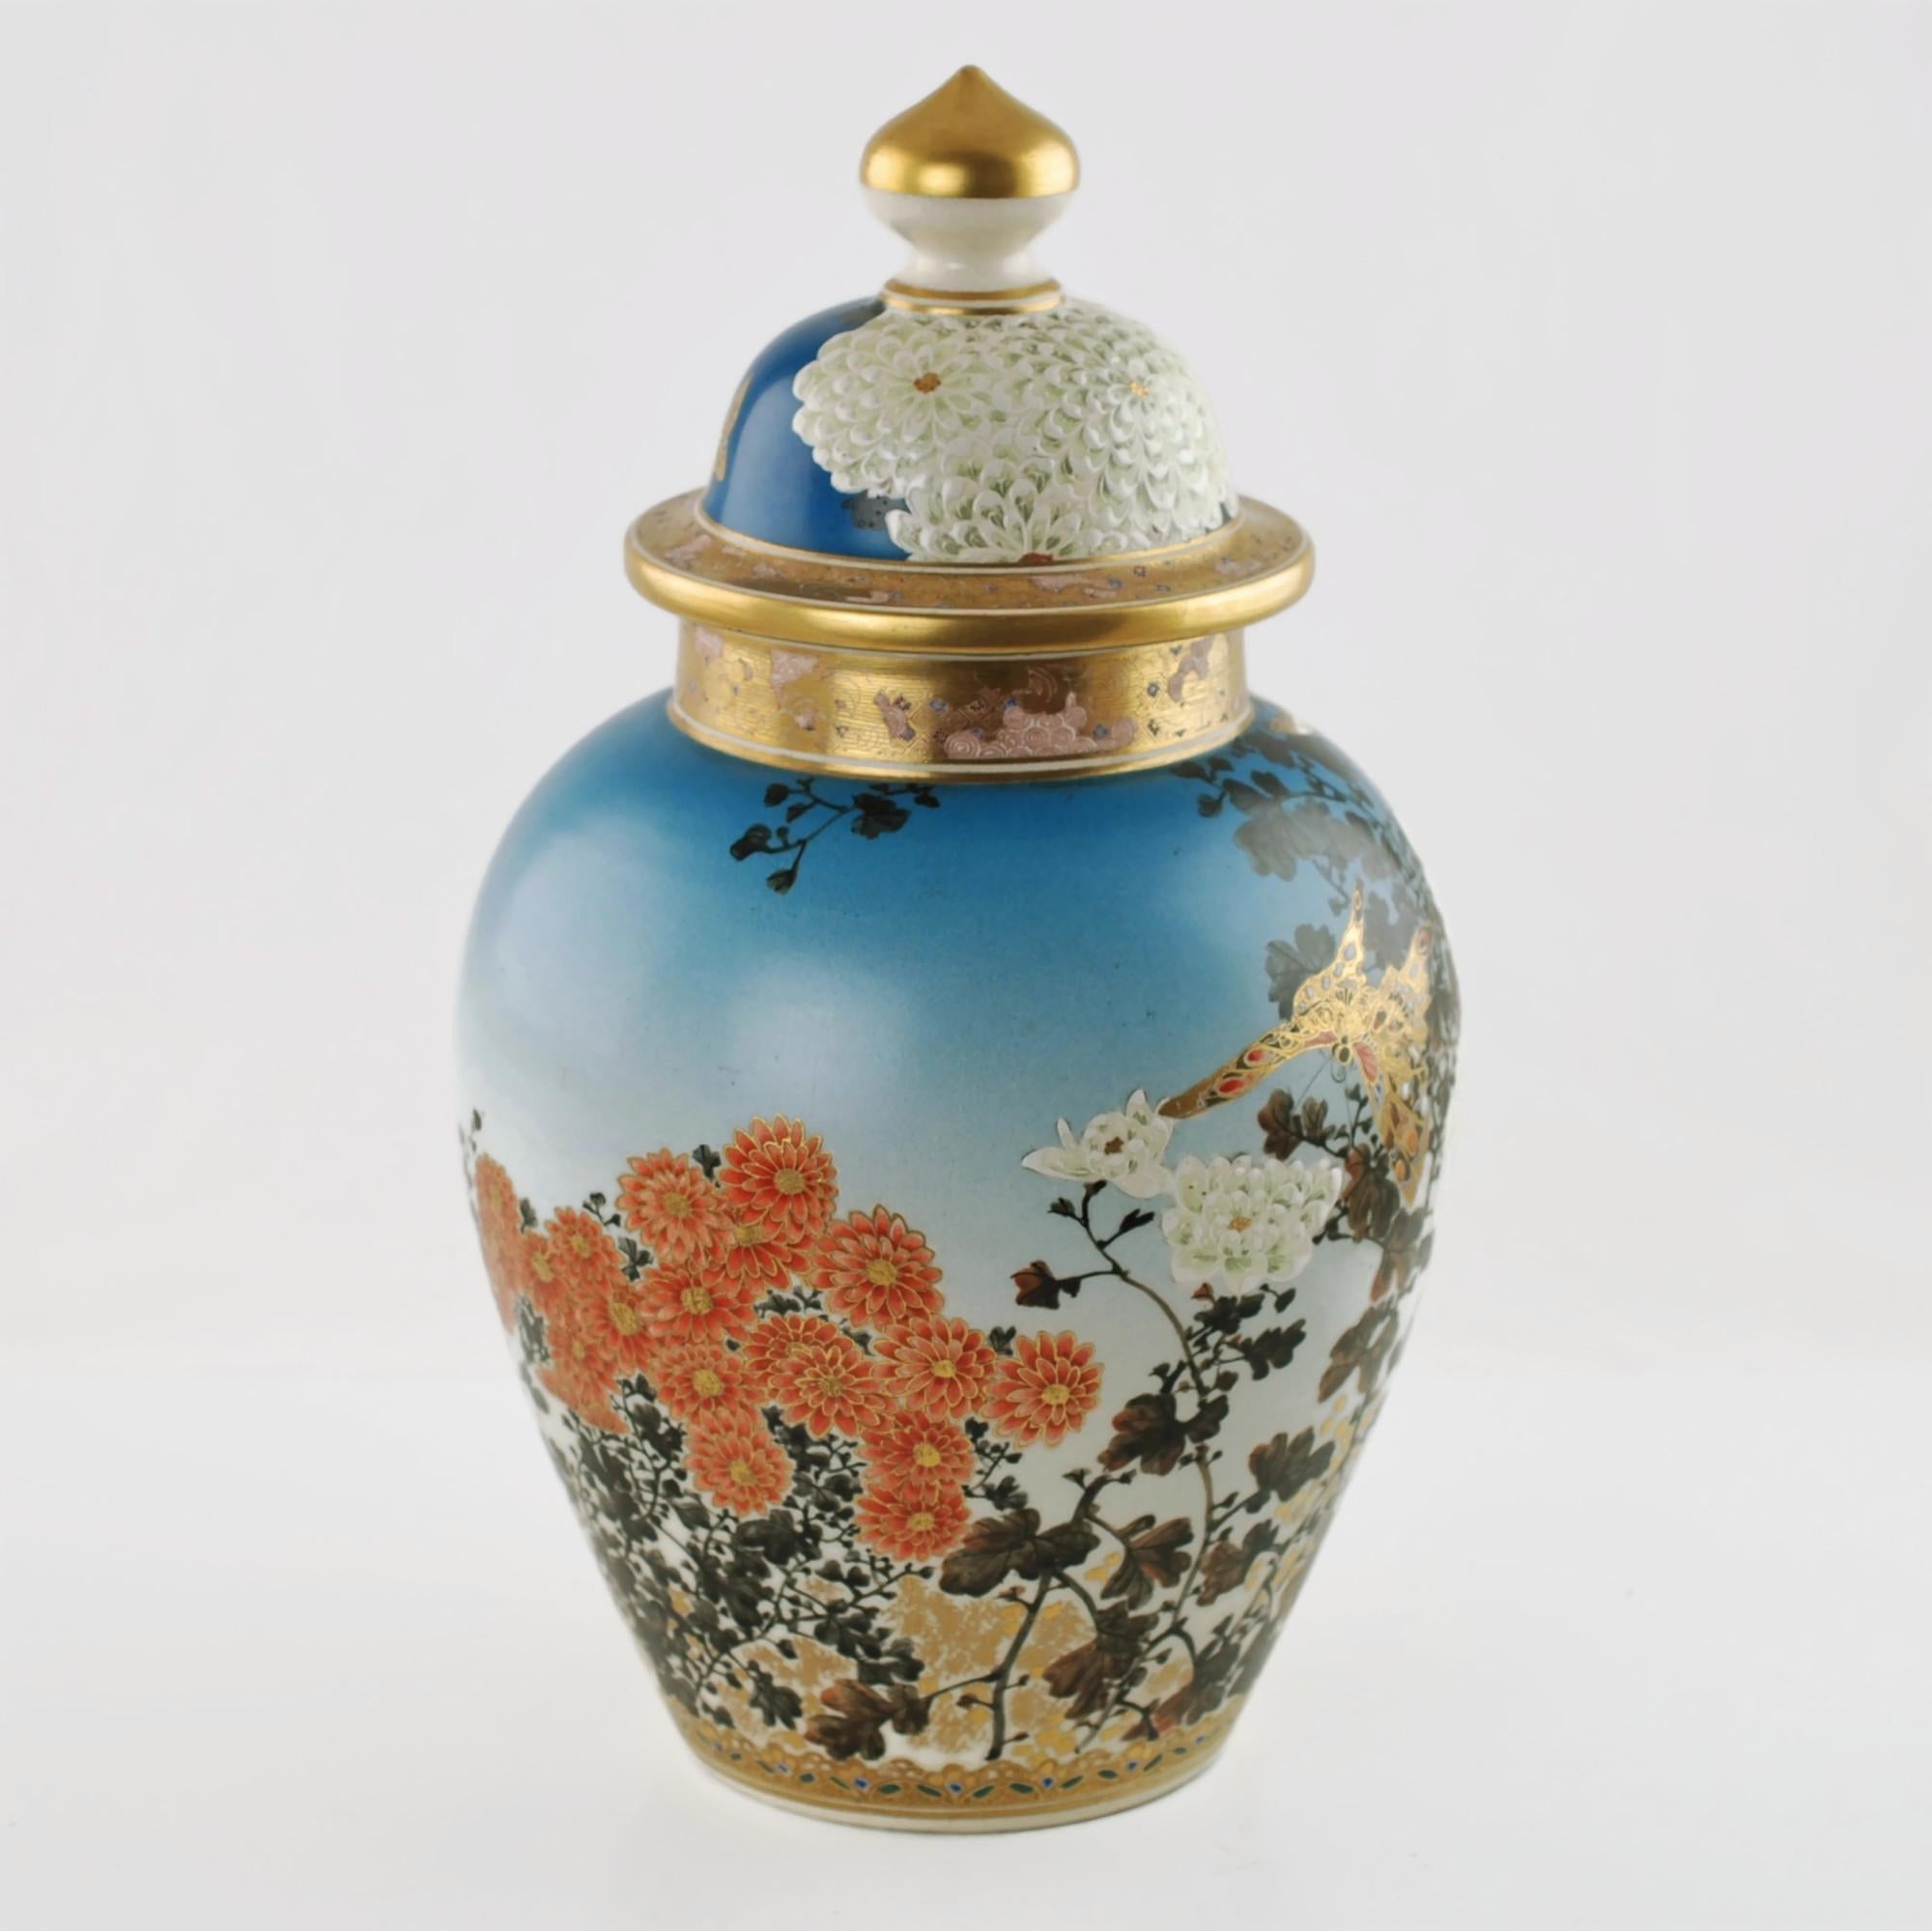 This outstanding late 19th century Japanese Satsuma porcelain covered temple jar has a traditional form with a domed lid. The piece features exquisite hand painted decoration which includes brightly hued flowers and associated foliage along with